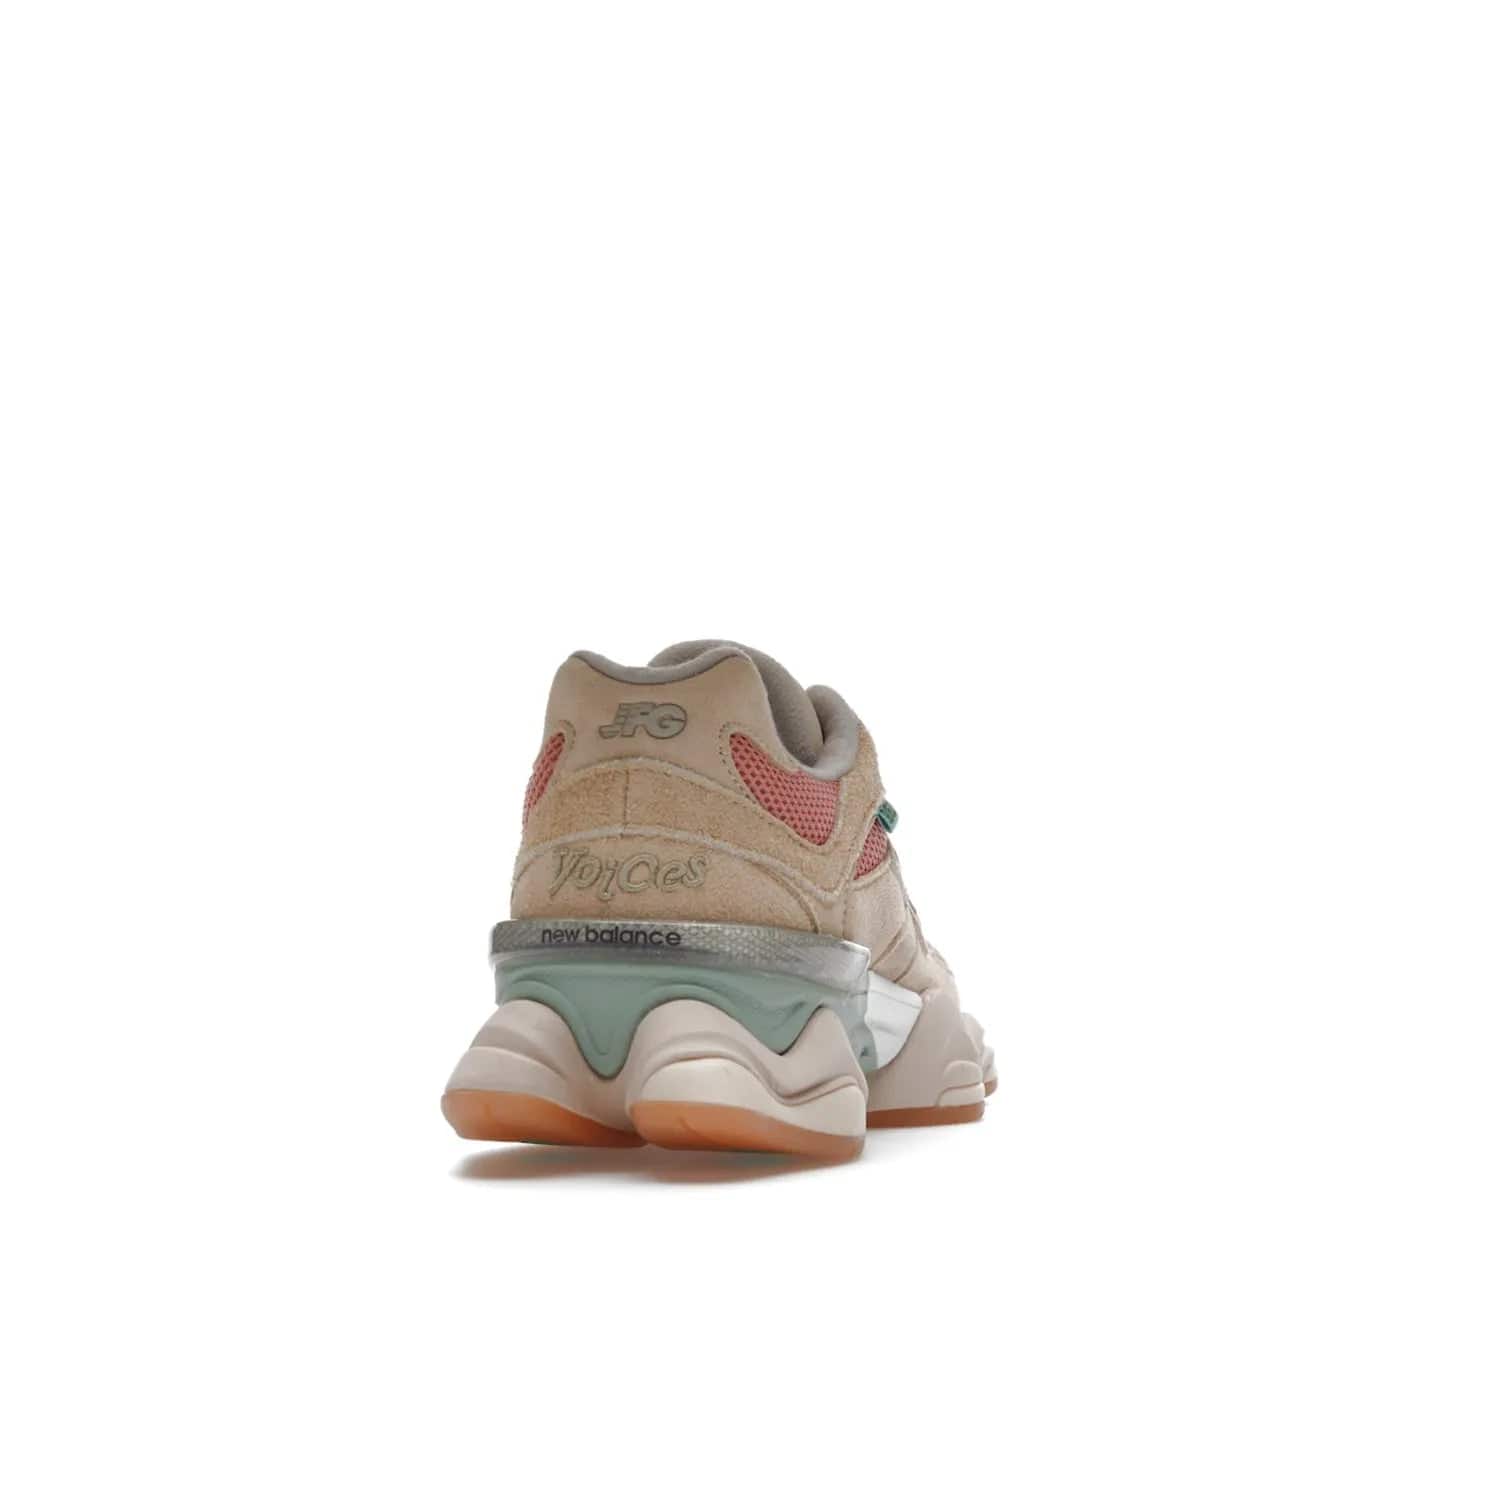 New Balance 9060 Joe Freshgoods Inside Voices Penny Cookie Pink - Image 29 - Only at www.BallersClubKickz.com - Introducing the New Balance 9060 Joe Freshgoods Inside Voices Cookie Pink. A stylish and comfortable sneaker featuring an ivory cream and blossom mesh construction, light brown suede overlays, New Balance logos, and "Inside Voices" embroidery. A white, green and beige sculptural sole finishes the look.